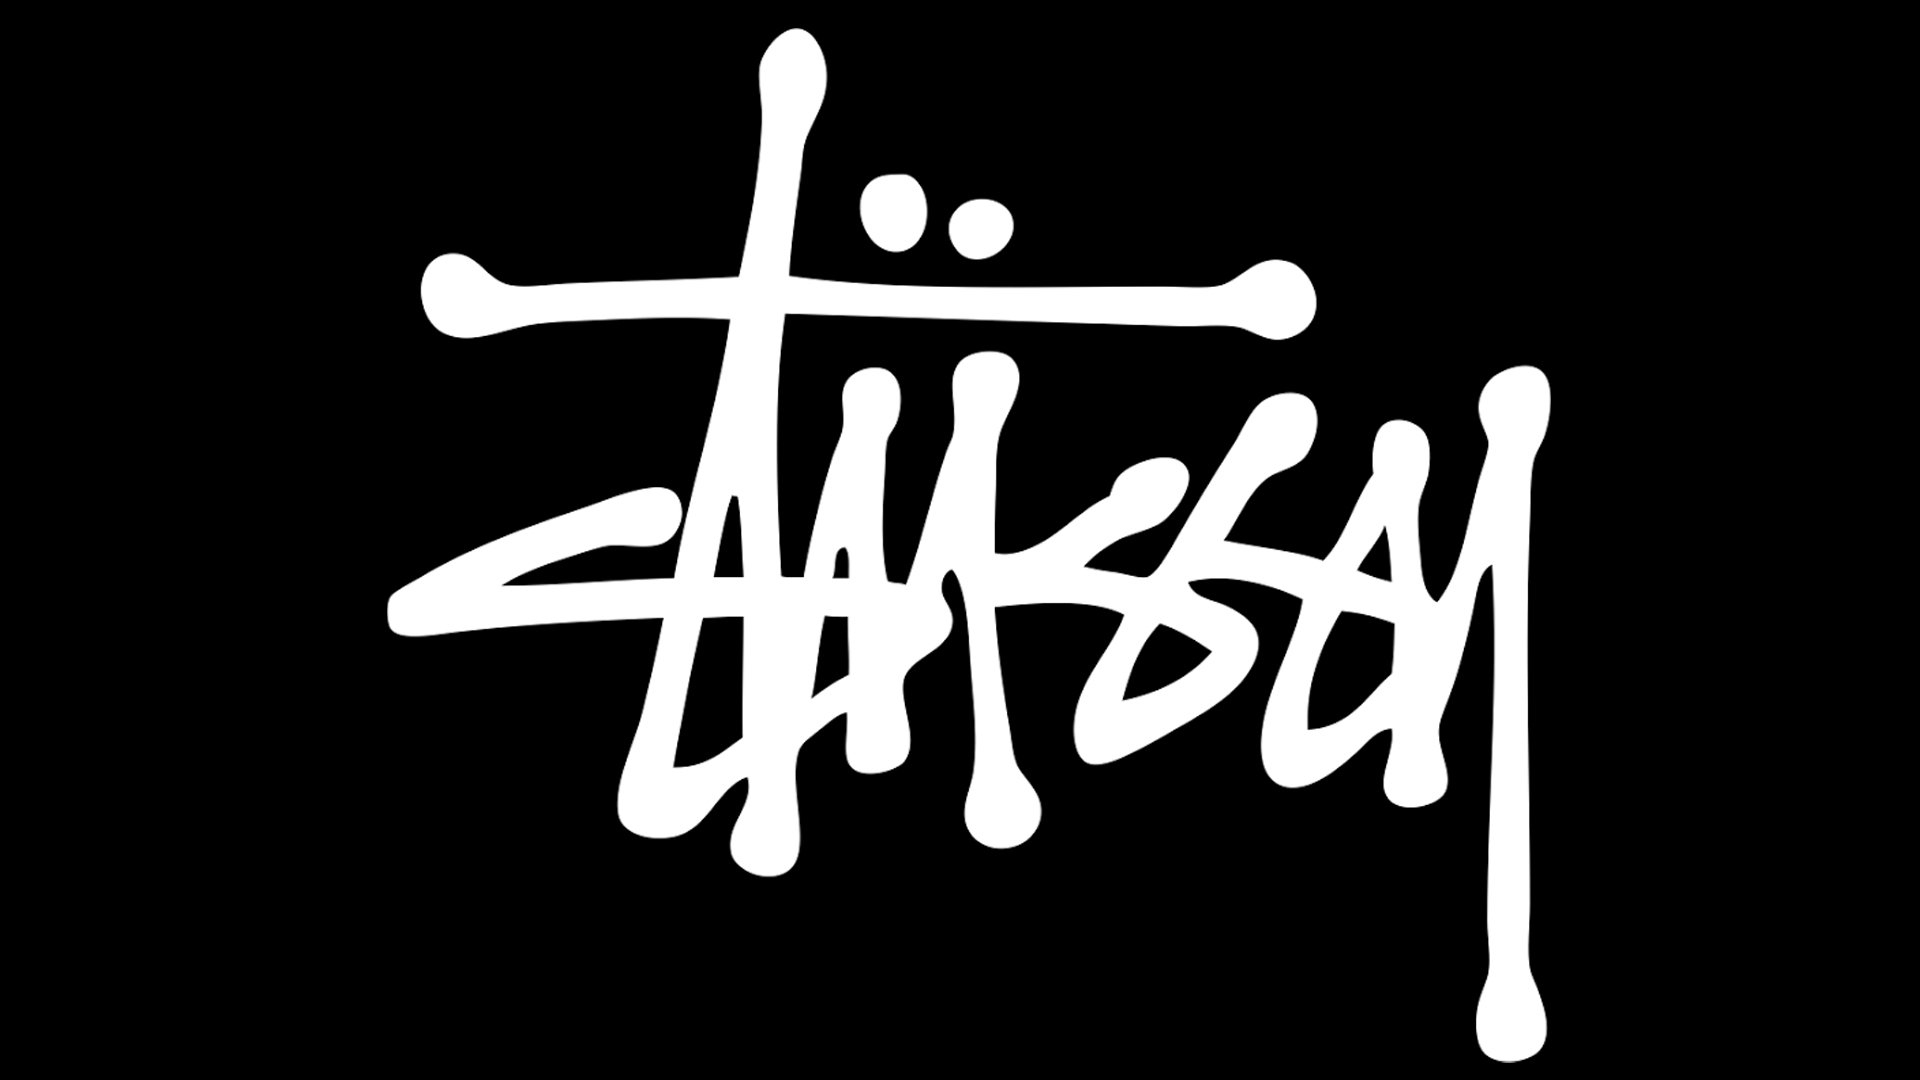 officialsstussy Profile Picture